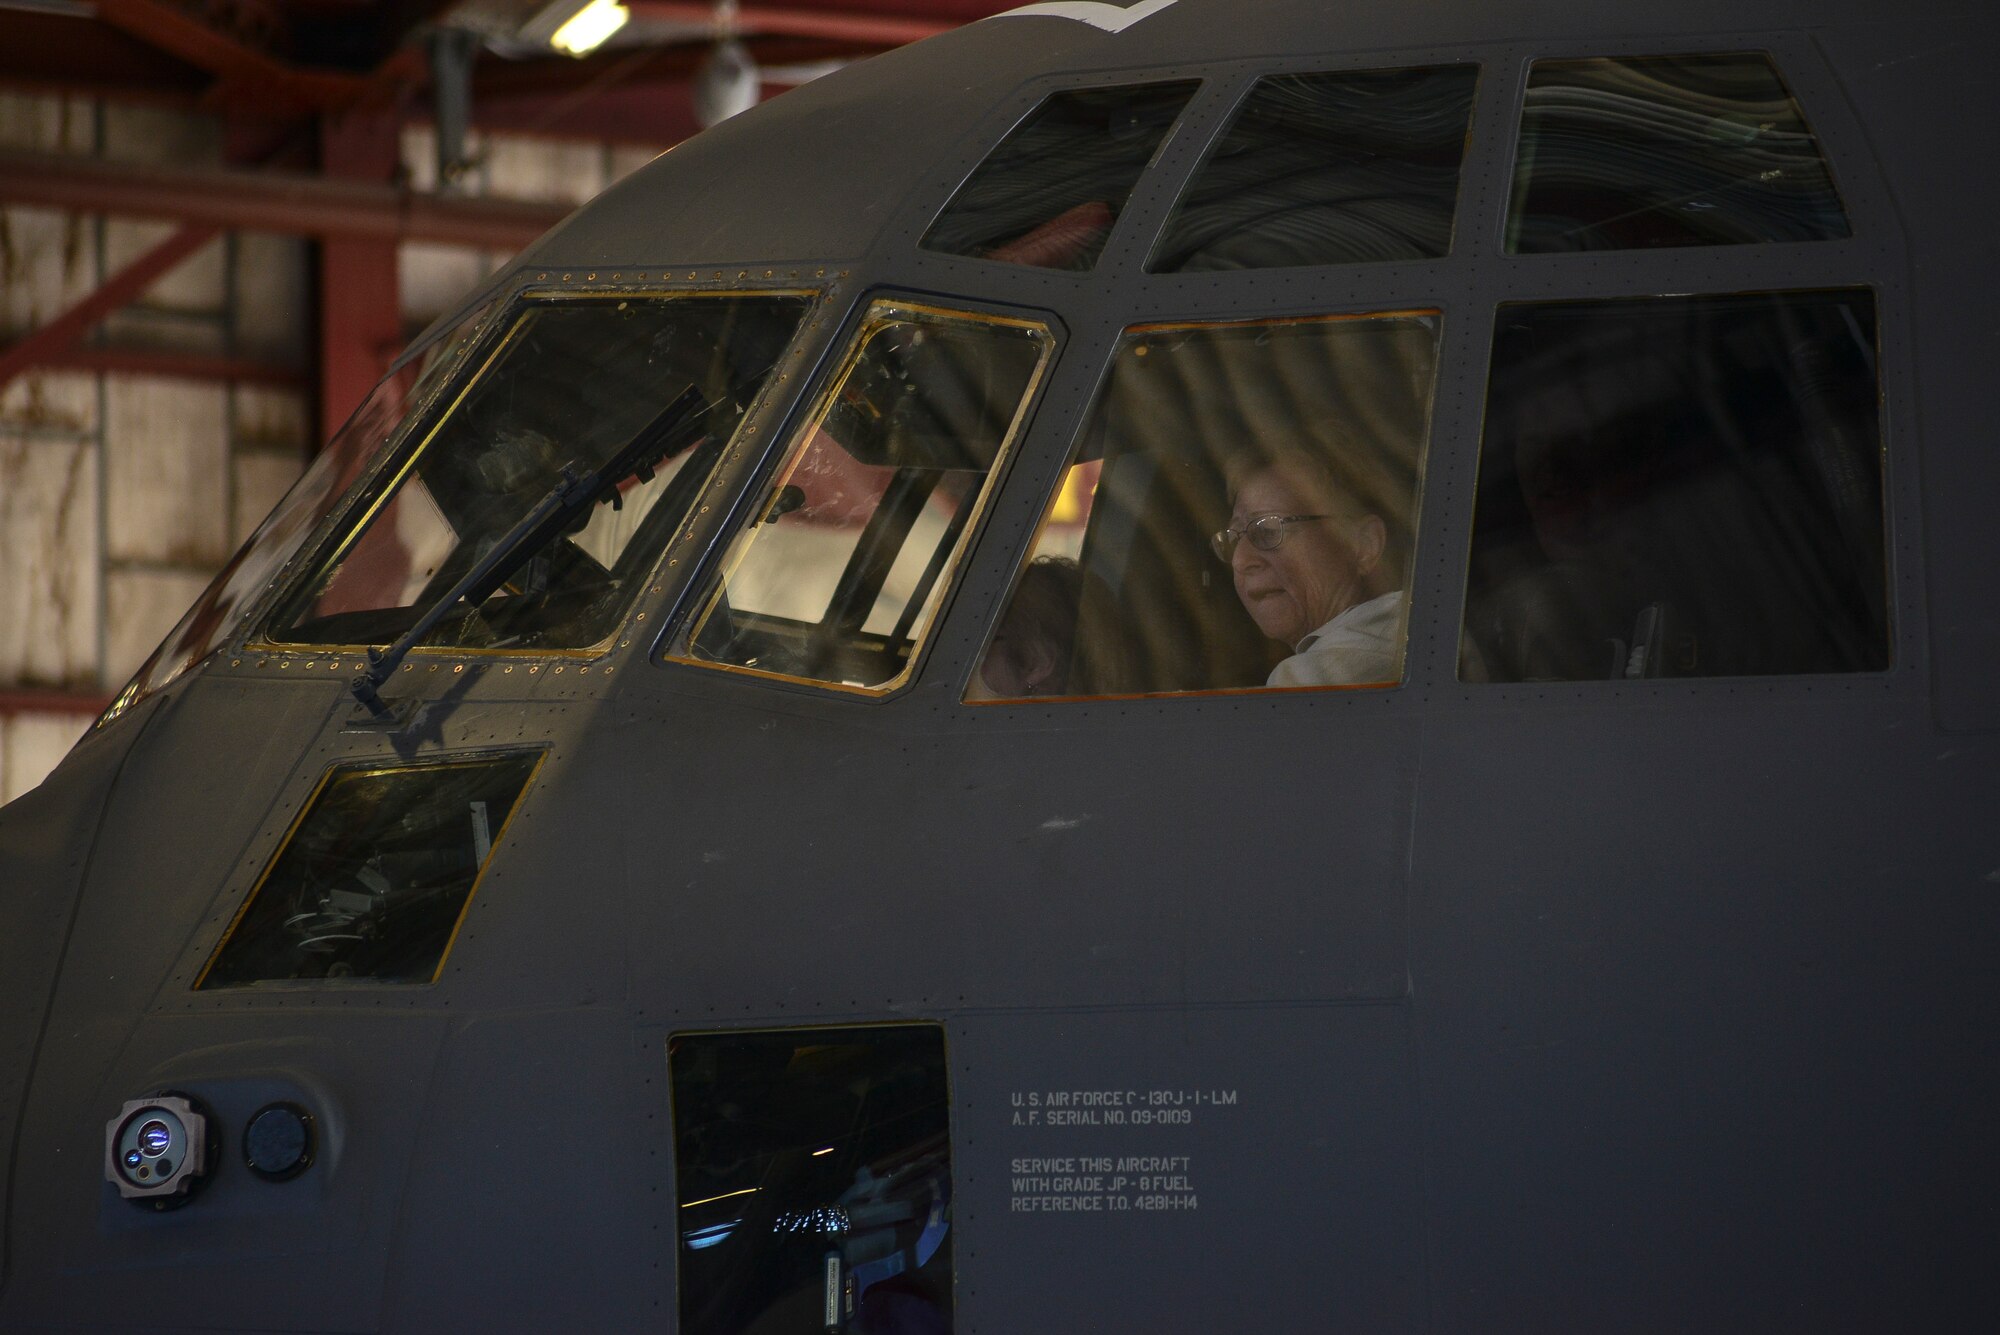 Nancy Bennett, sister of an ovarian cancer survivor, sits in the cockpit of an aircraft during the Warriors for Warriors event at Kirtland Air Force Base, N.M., Nov. 2, 2019. Bennett’s sister has attended all three events the Warriors for Warriors have hosted at the base. (U.S. Air Force photo by Staff Sgt. Kimberly Nagle)